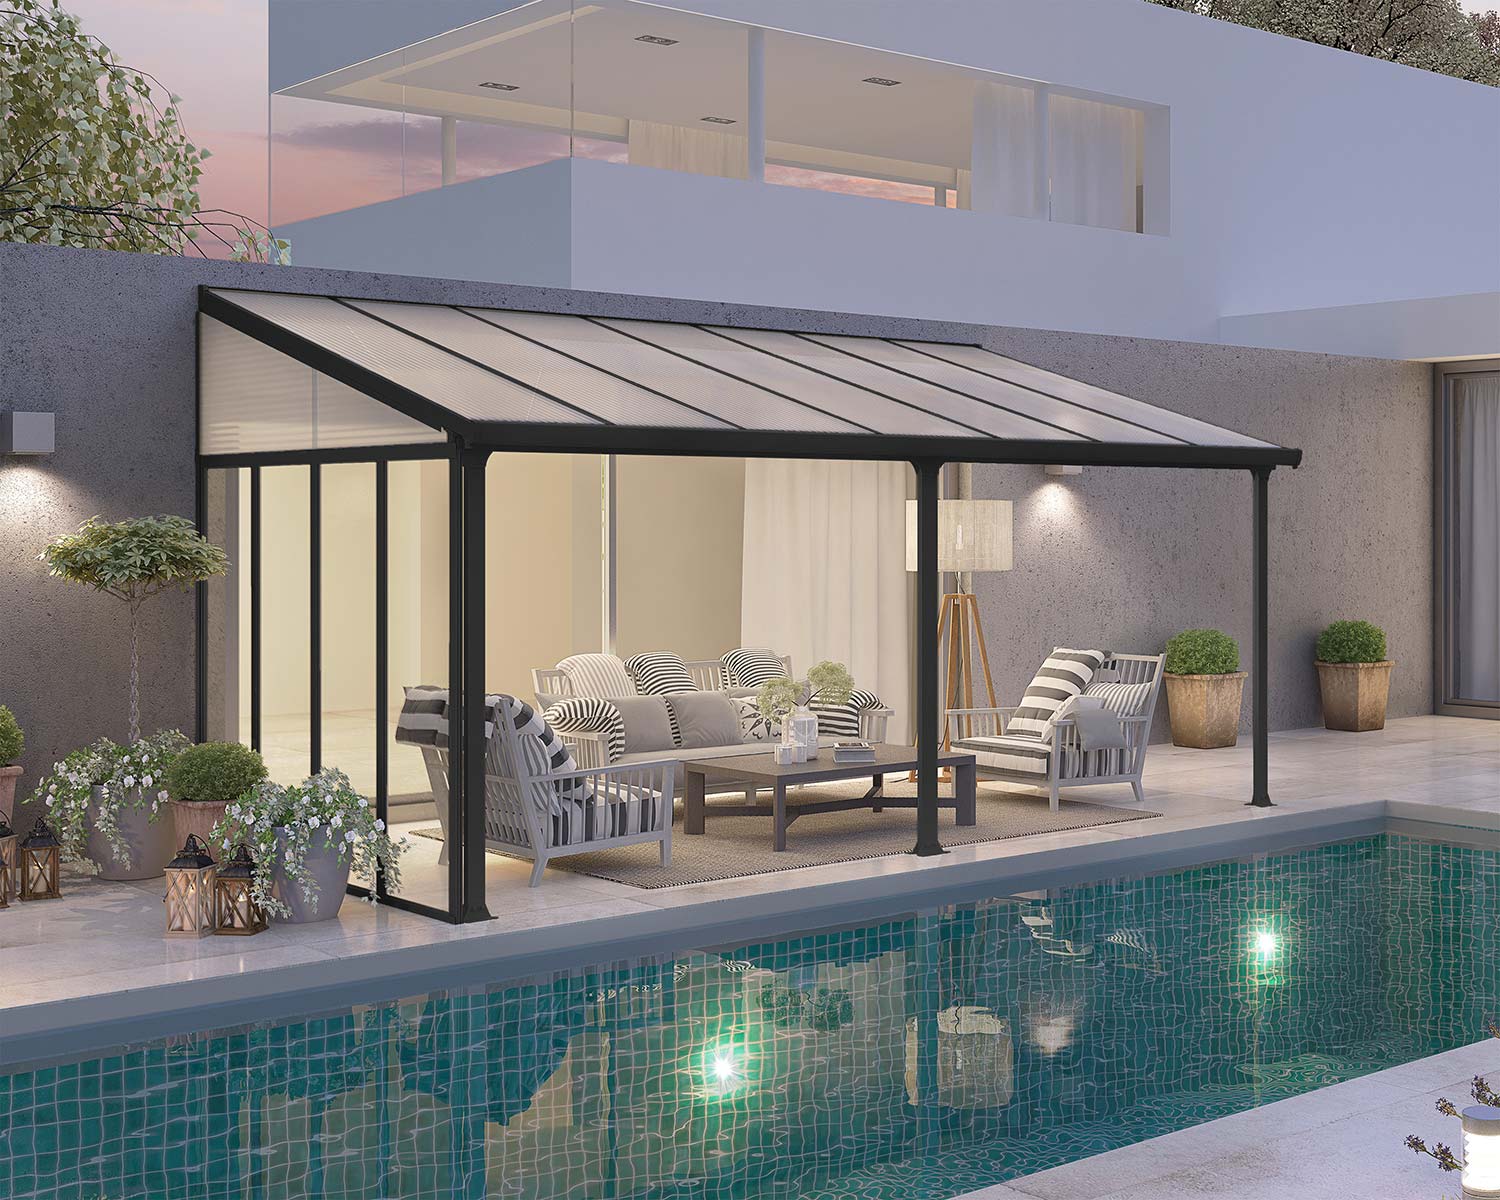 Grey Aluminium Patio Cover 10 ft. x 14 ft. Attached to House Next to Pool Patio with Side Walls and Polycarbonate Roof Panels. Covers Patio Outdoor Furniture